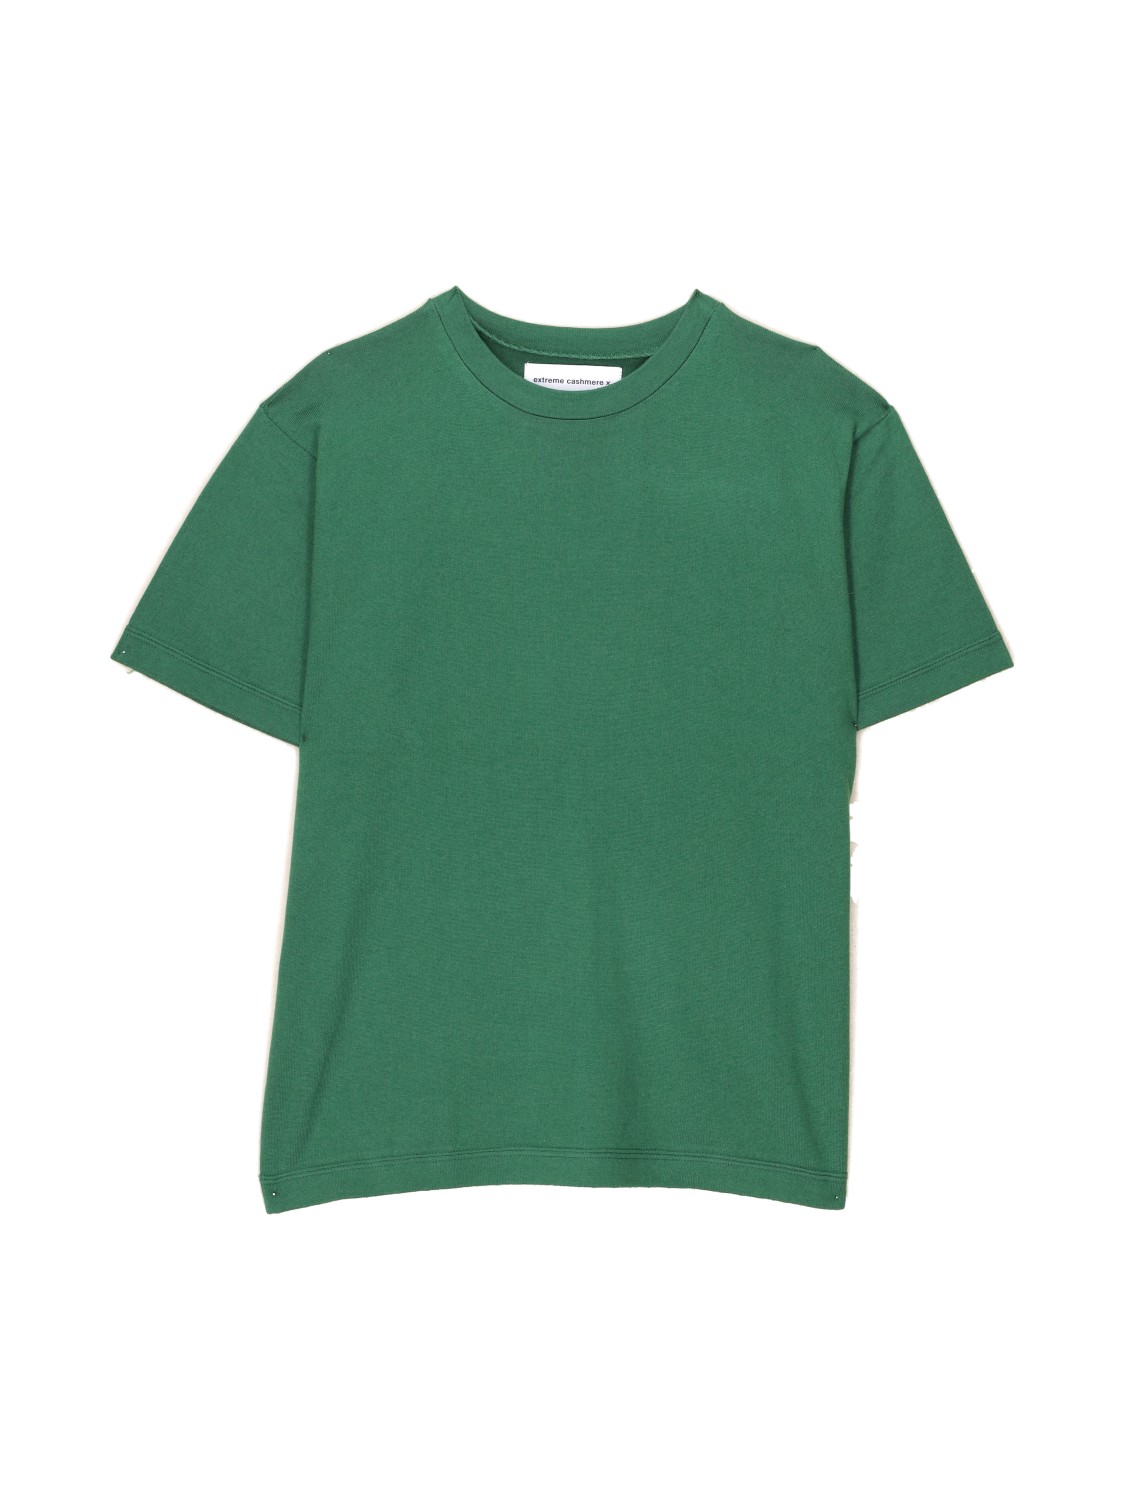 Extreme Cashmere N° 268 Cuba - Boxy t-shirt in cotton-cashmere-blend  marine One Size